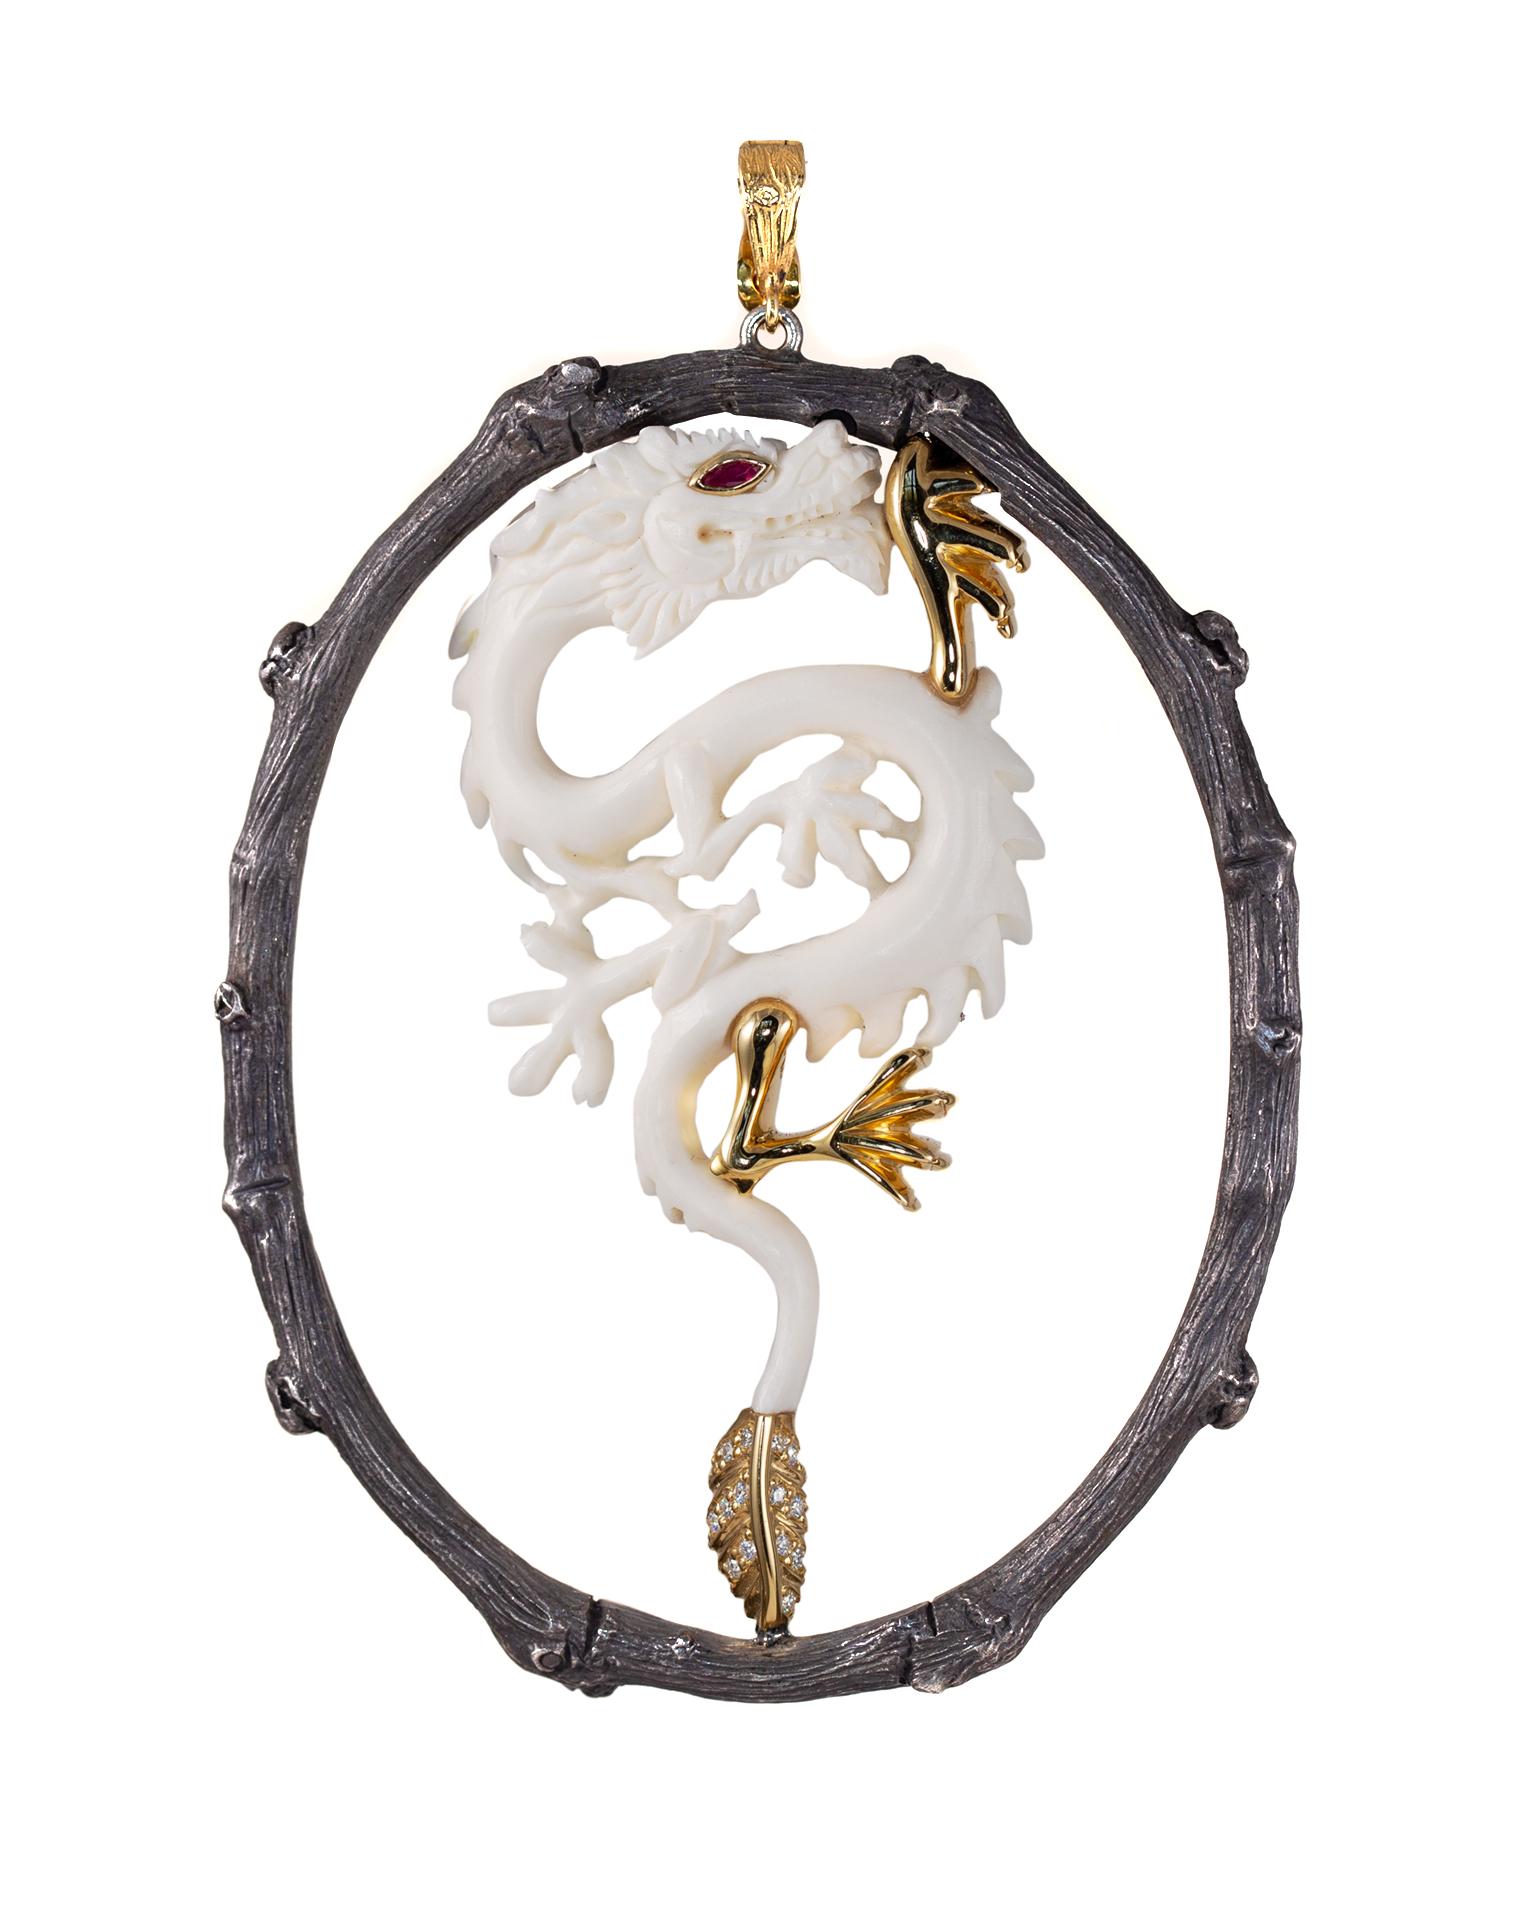 This dragon pendant is composed of carved cow bone and 18k yellow gold in black oxidized sterling silver frame. It features a .05 carat ruby eye and approximately .18 carat total weight diamonds. 

The Spirit Animals Collection features miniature